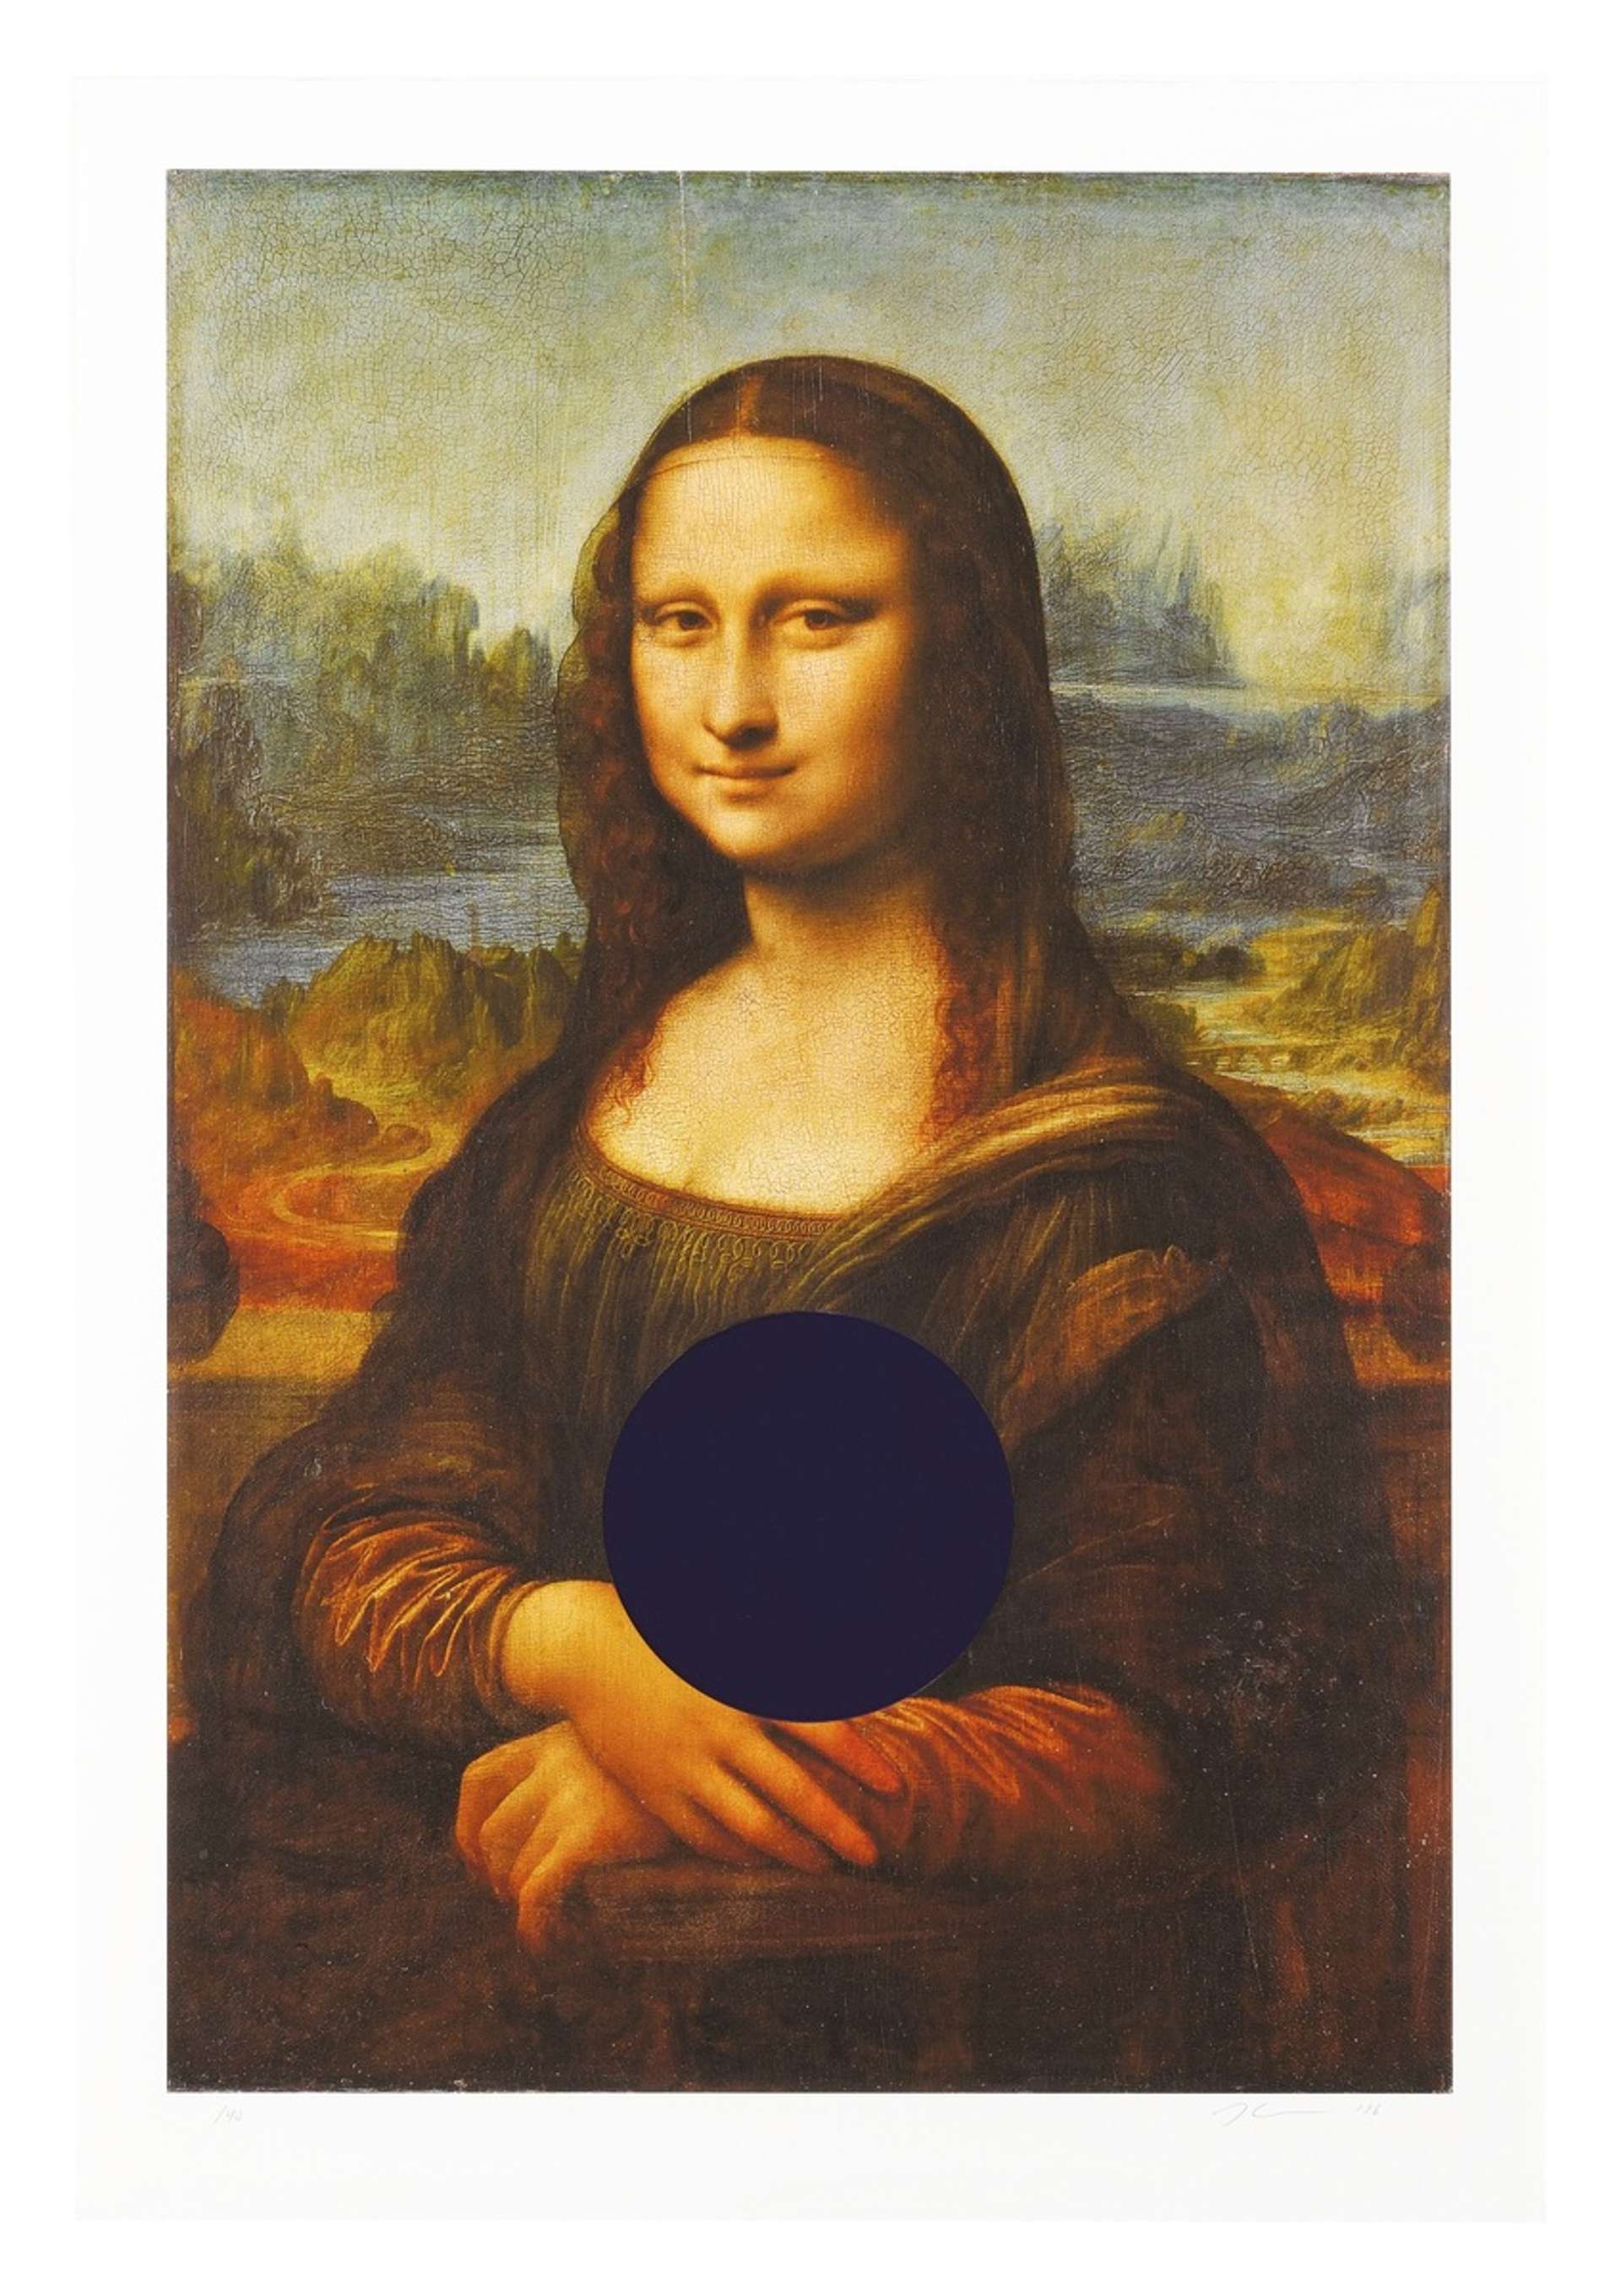 A parody of Leonardo da Vinci's Mona Lisa. The original portrait of a young woman smiling our to the viewer is disrupted by a circle of blue paint, painted over the sitter's hands.